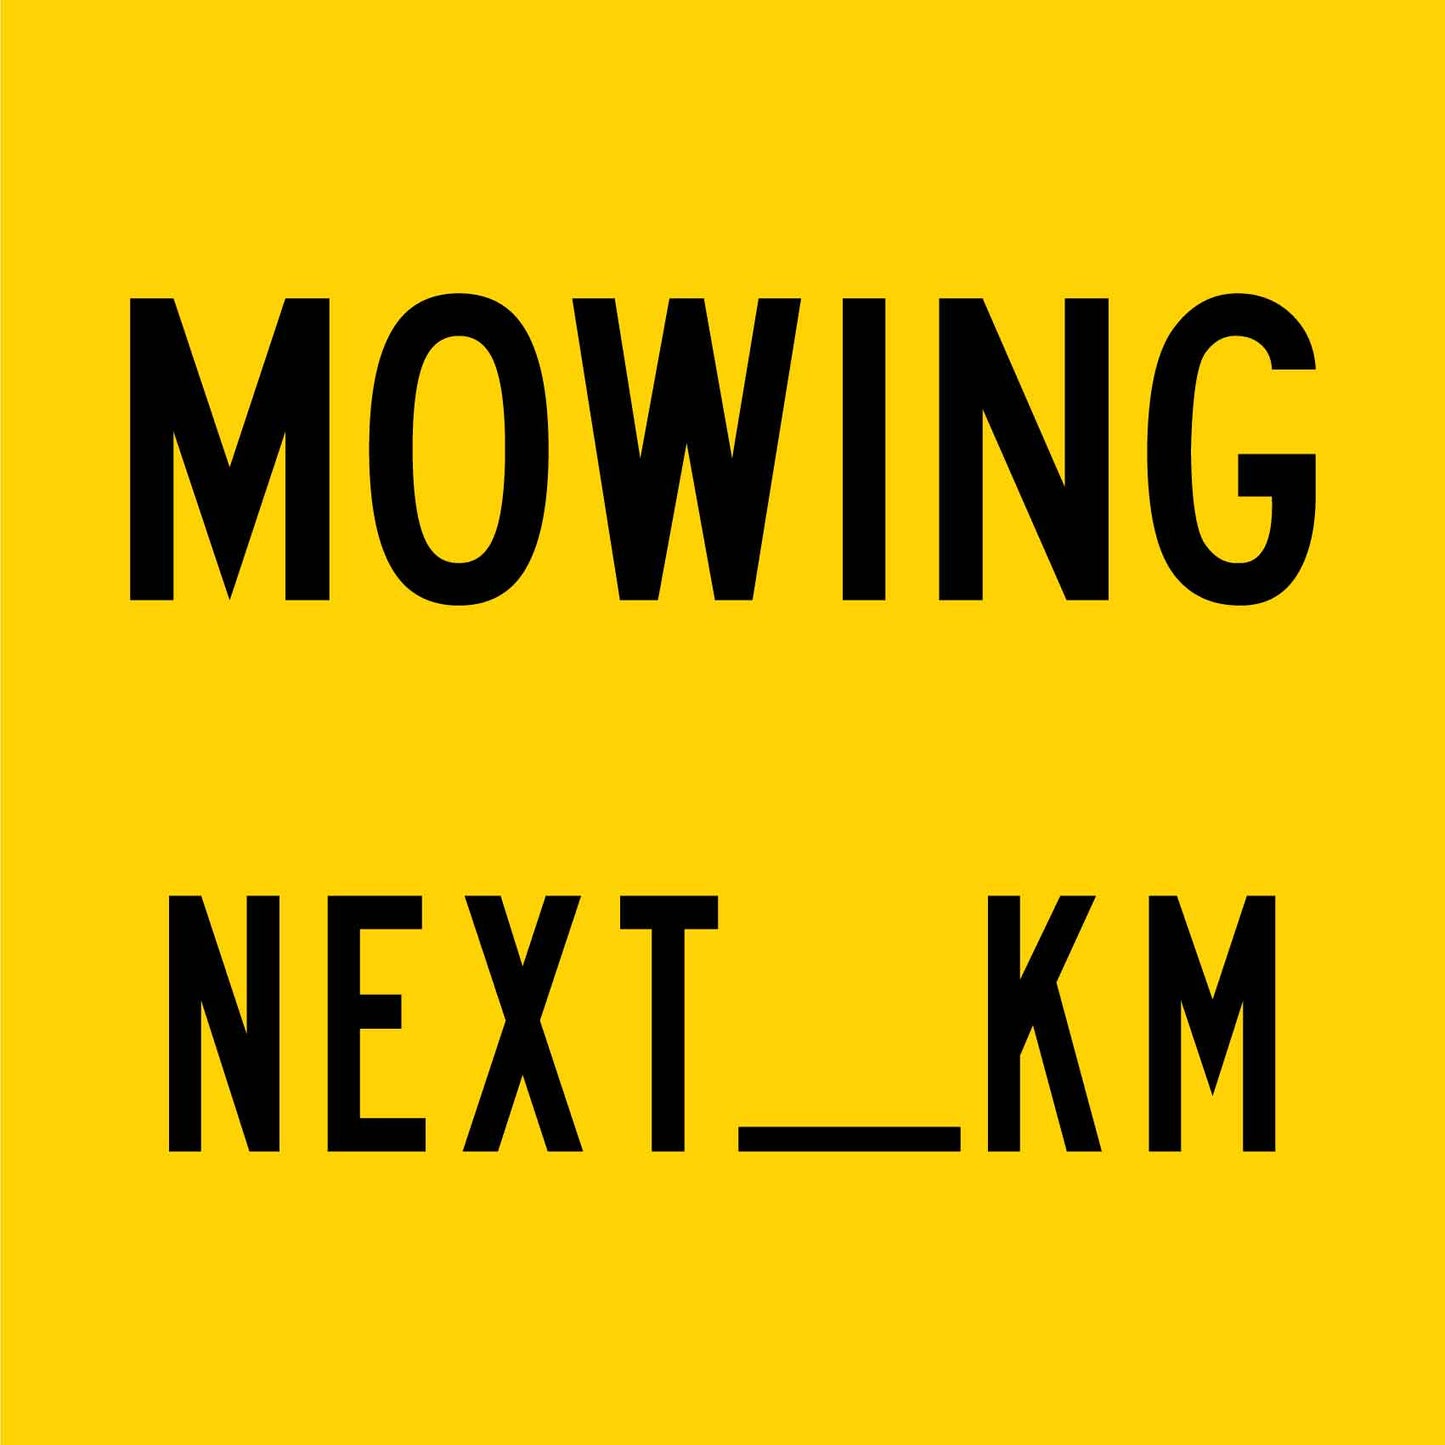 Mowing Next __ km Multi Message Reflective Traffic Sign